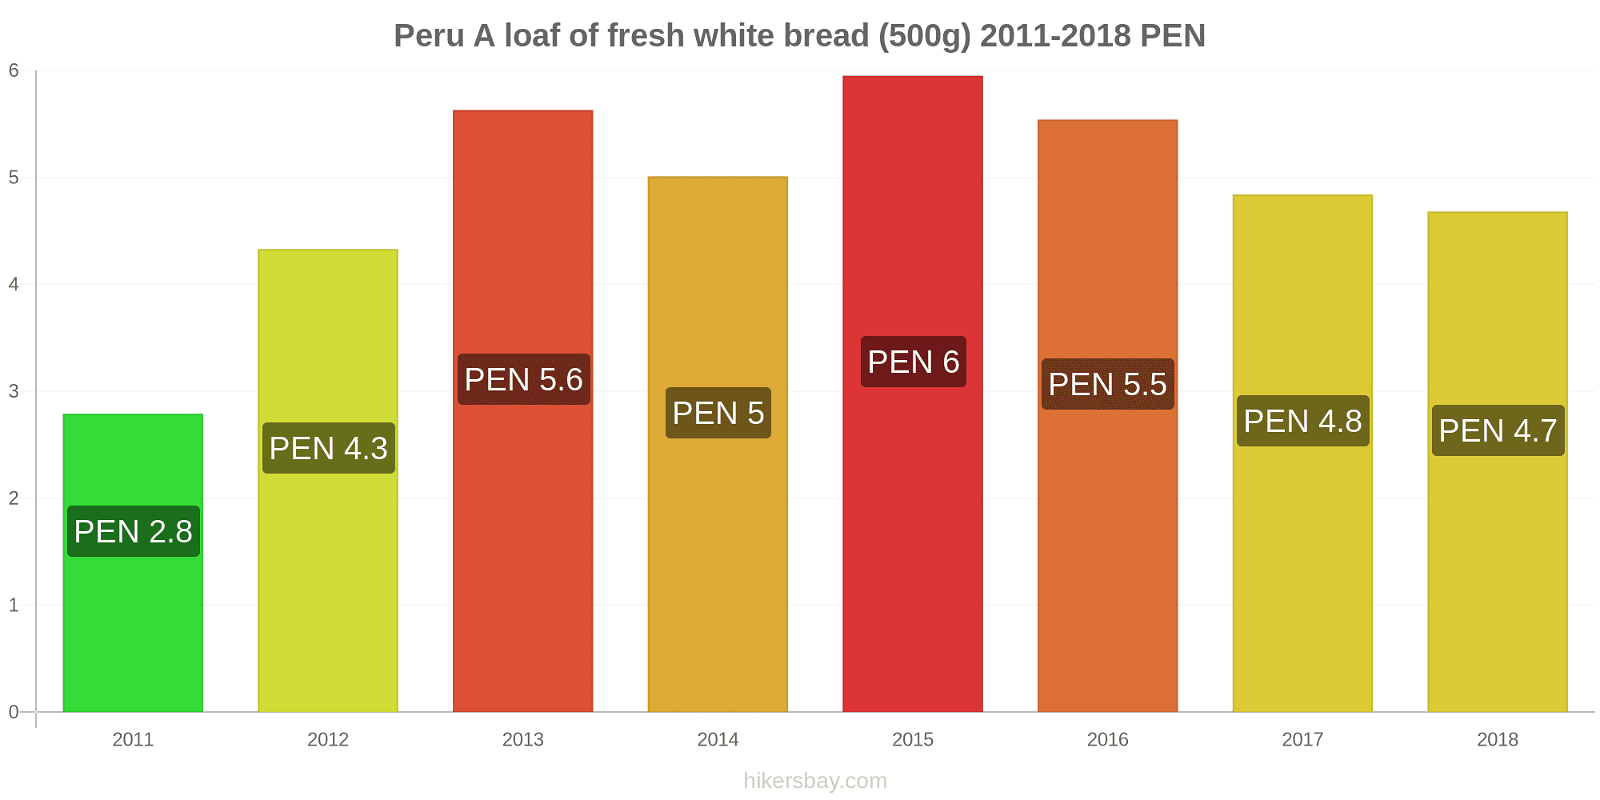 Peru price changes A loaf of fresh white bread (500g) hikersbay.com